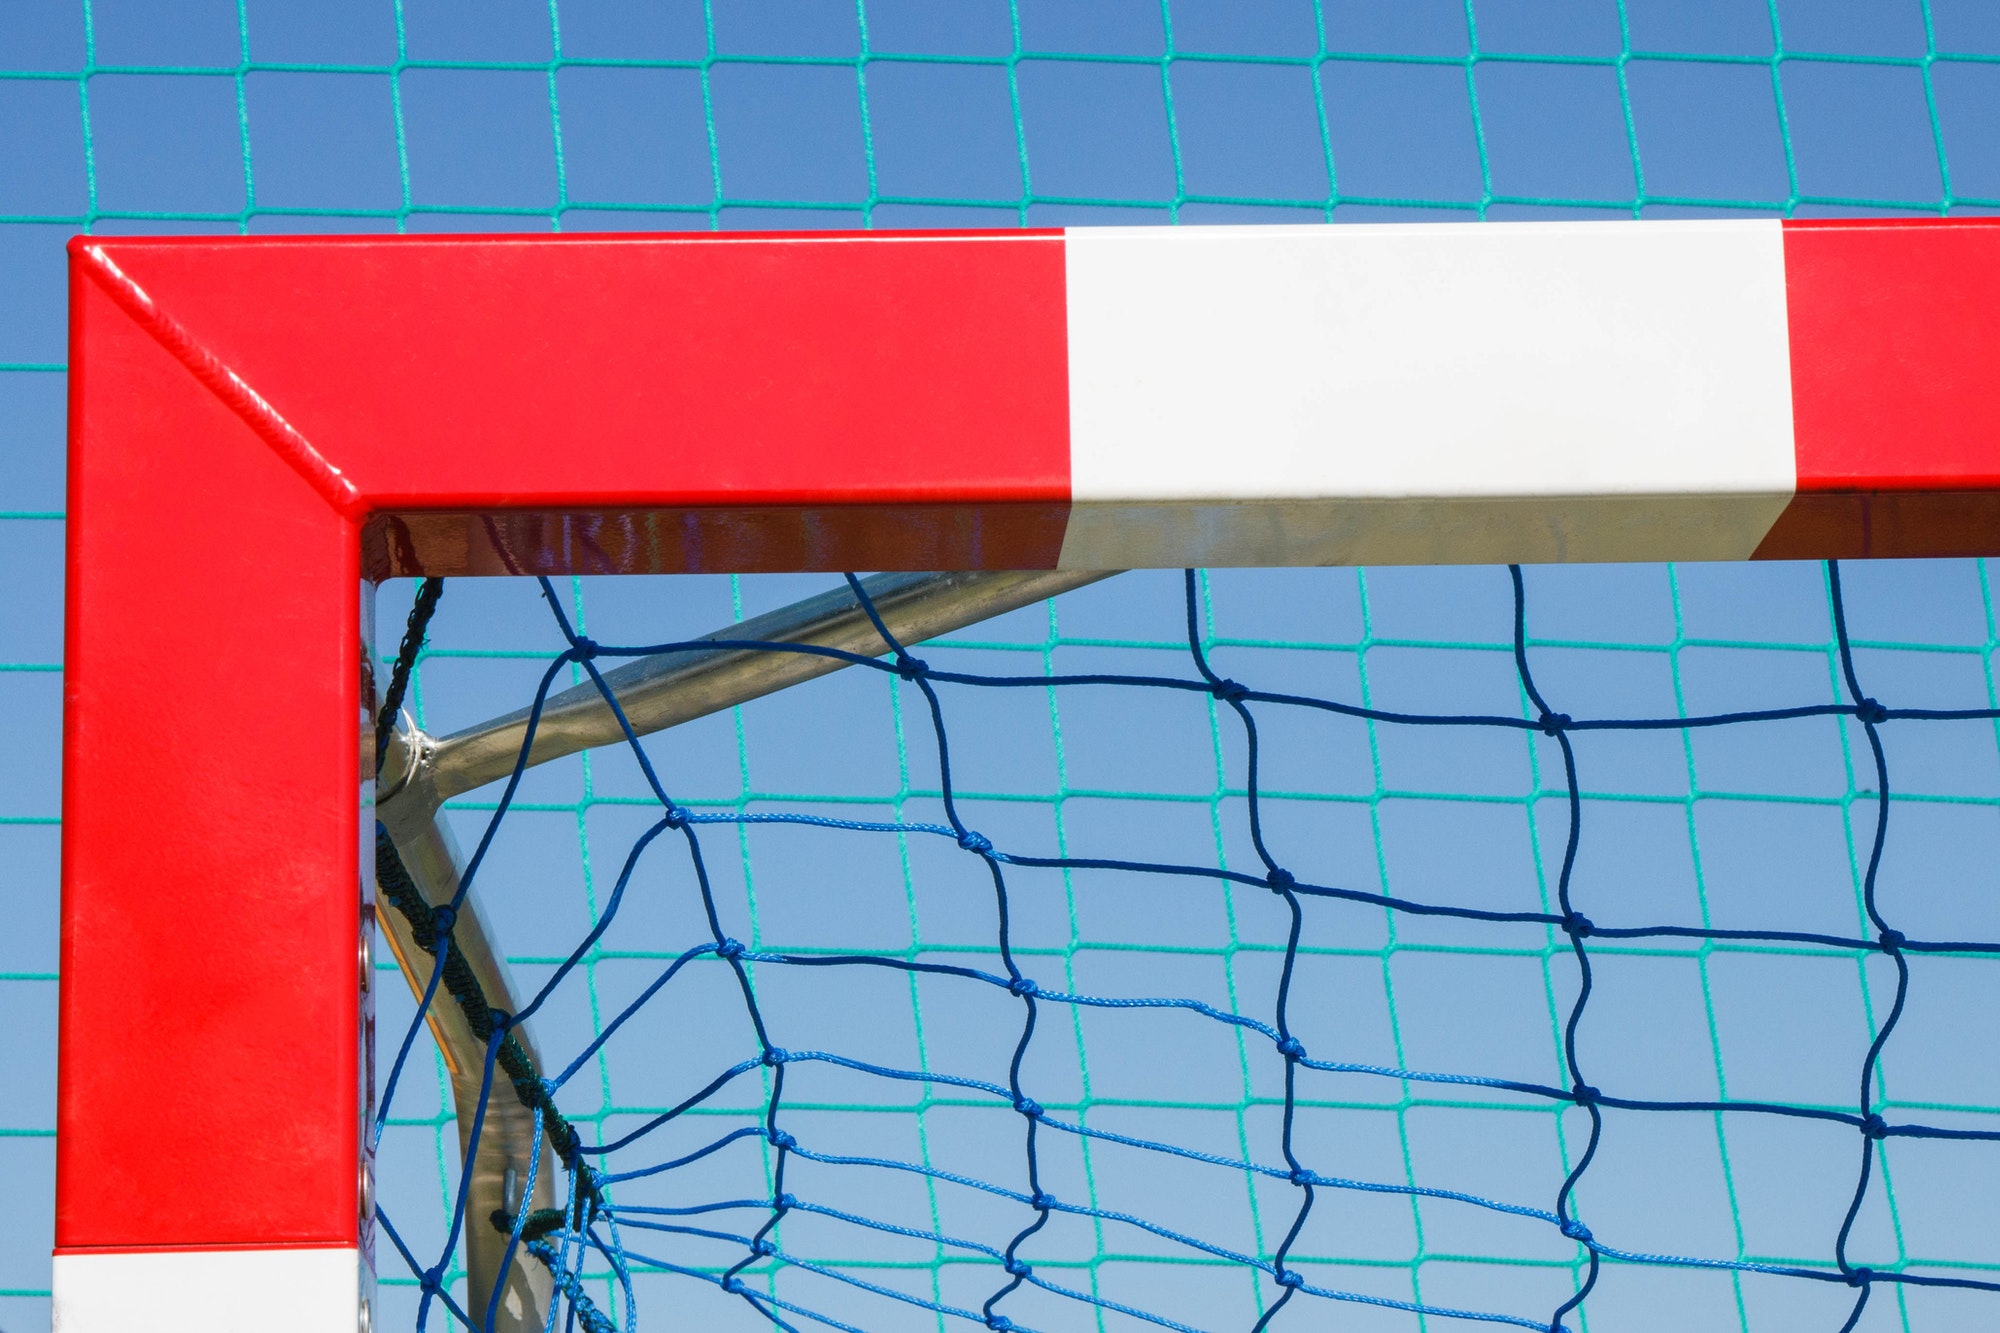 Football or handball goal with red and white goalpost